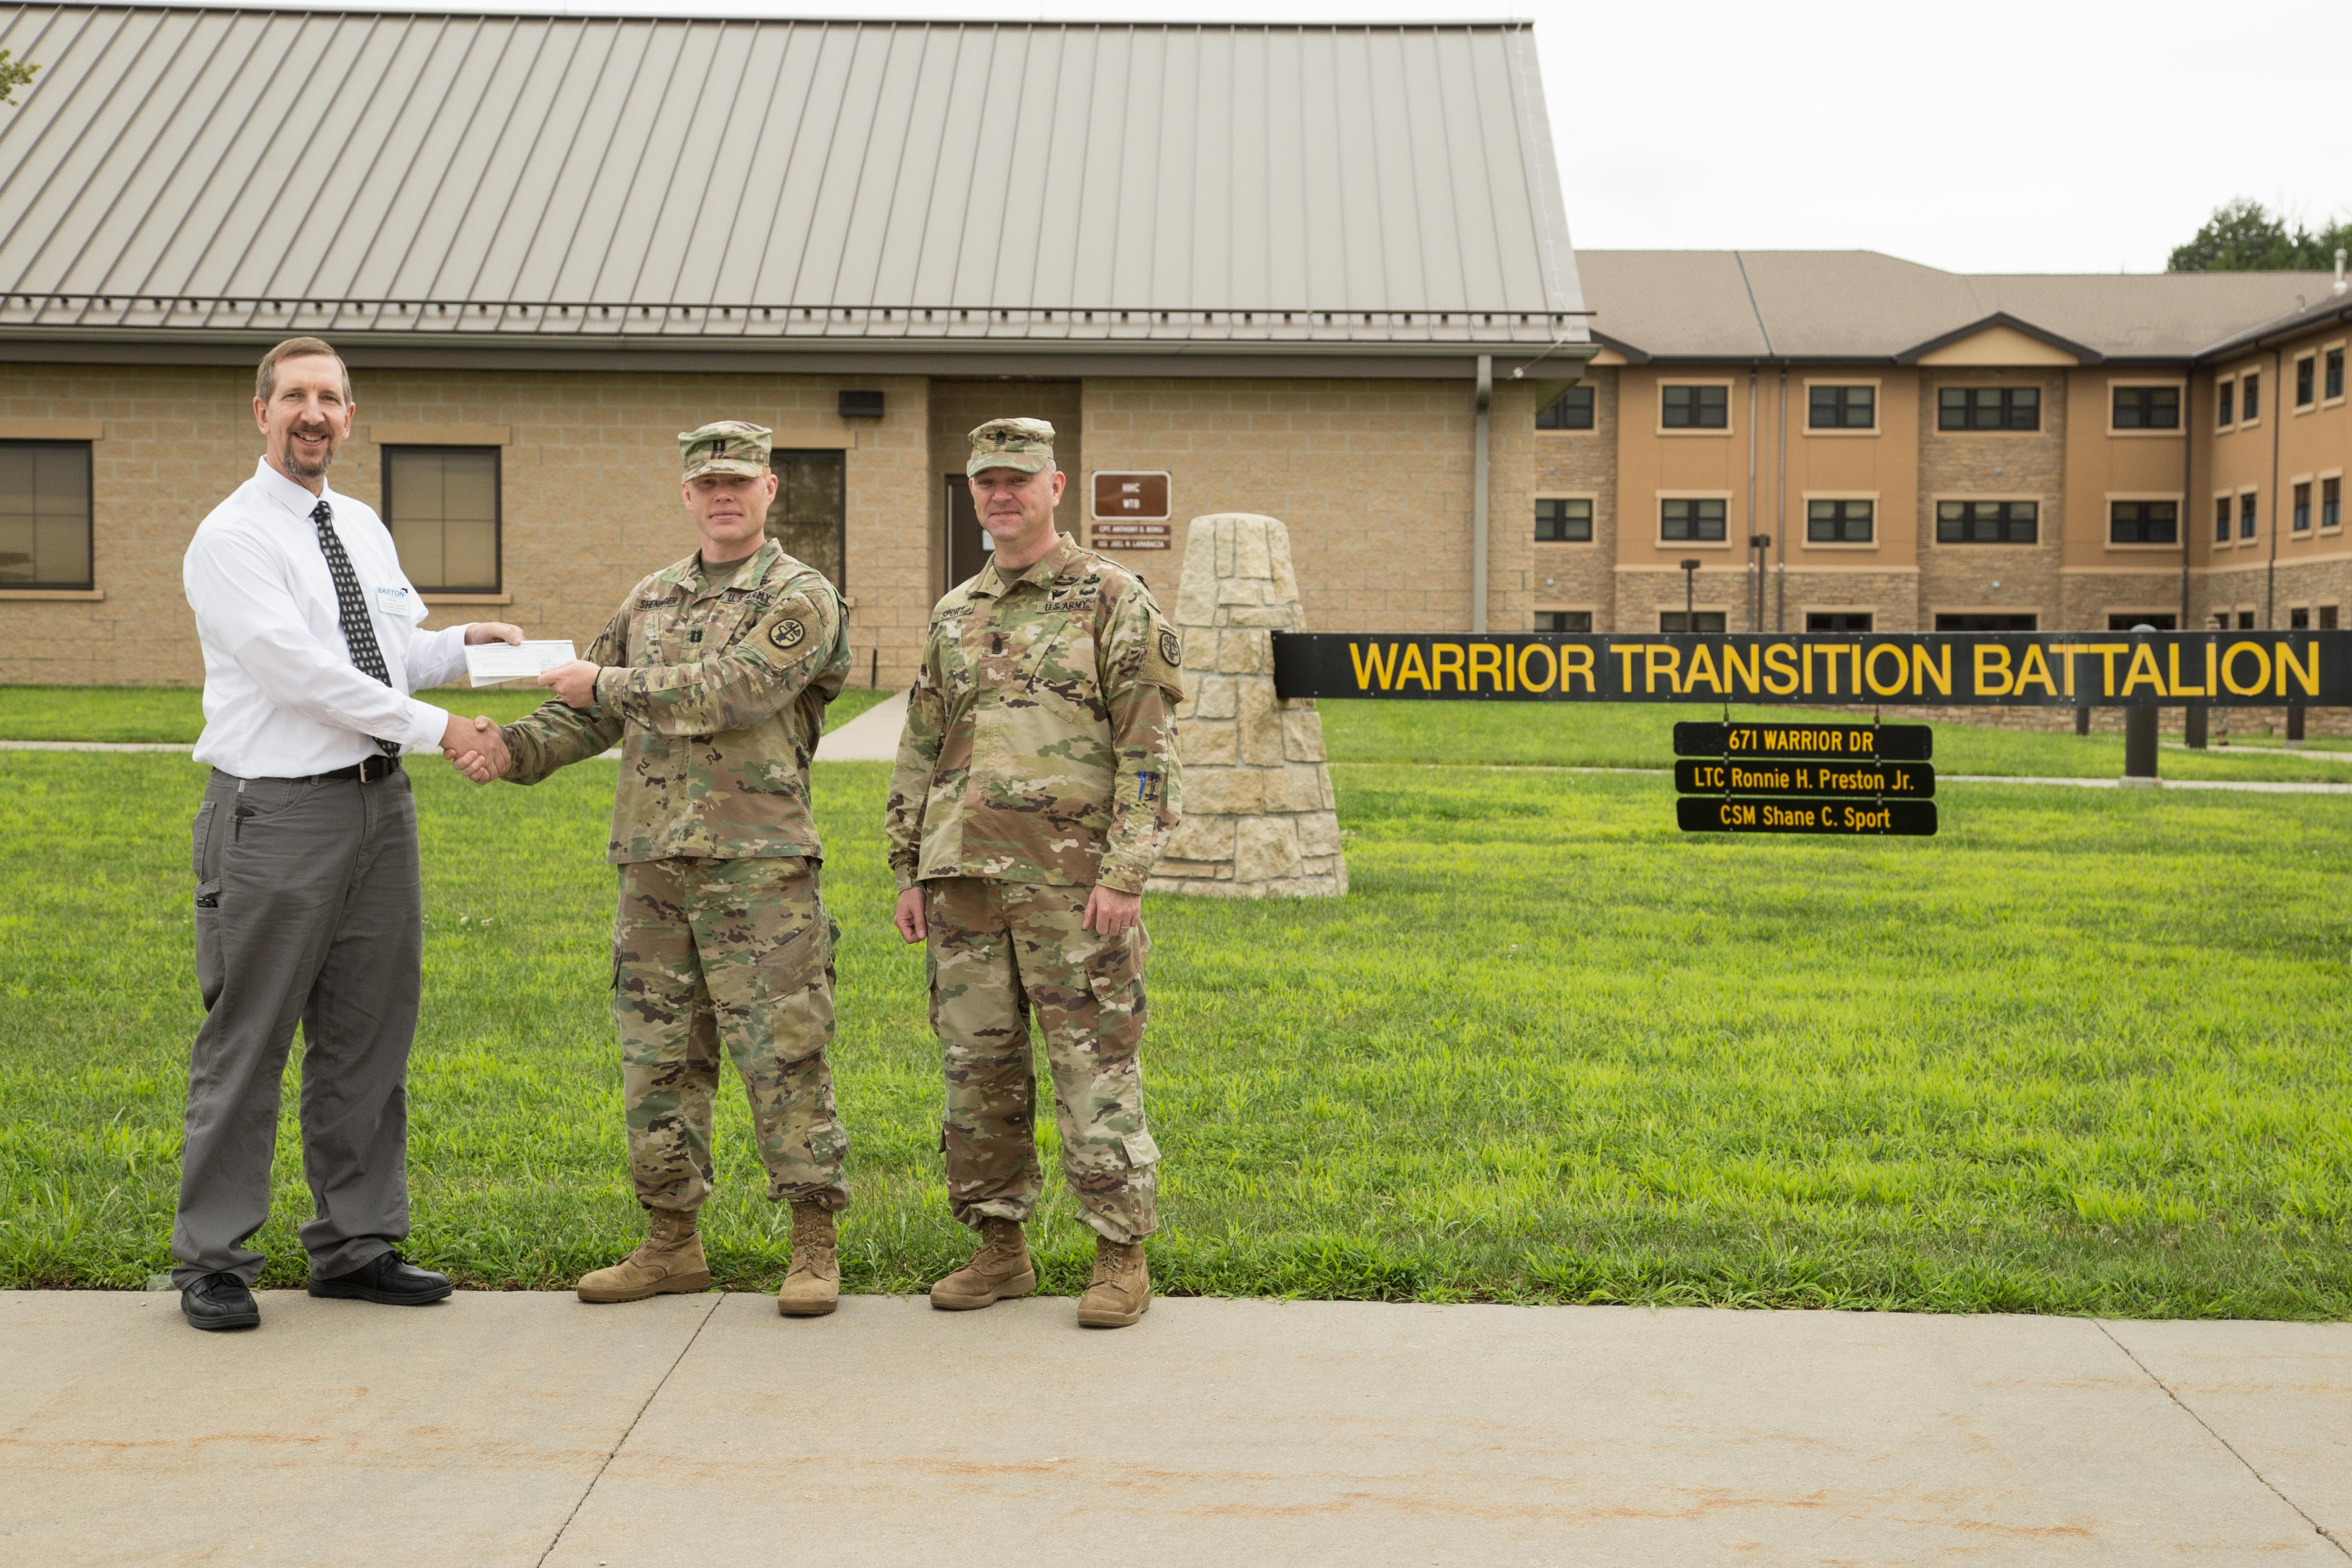 Kurt Teal, Dean of Fort Riley Academics, Technical Education and Military Outreach Programs at Barton Community College, presents a check for $3,250 to Bravo Company Commander Daniel Sheninger and Command Sergeant Major Shane Sport. 